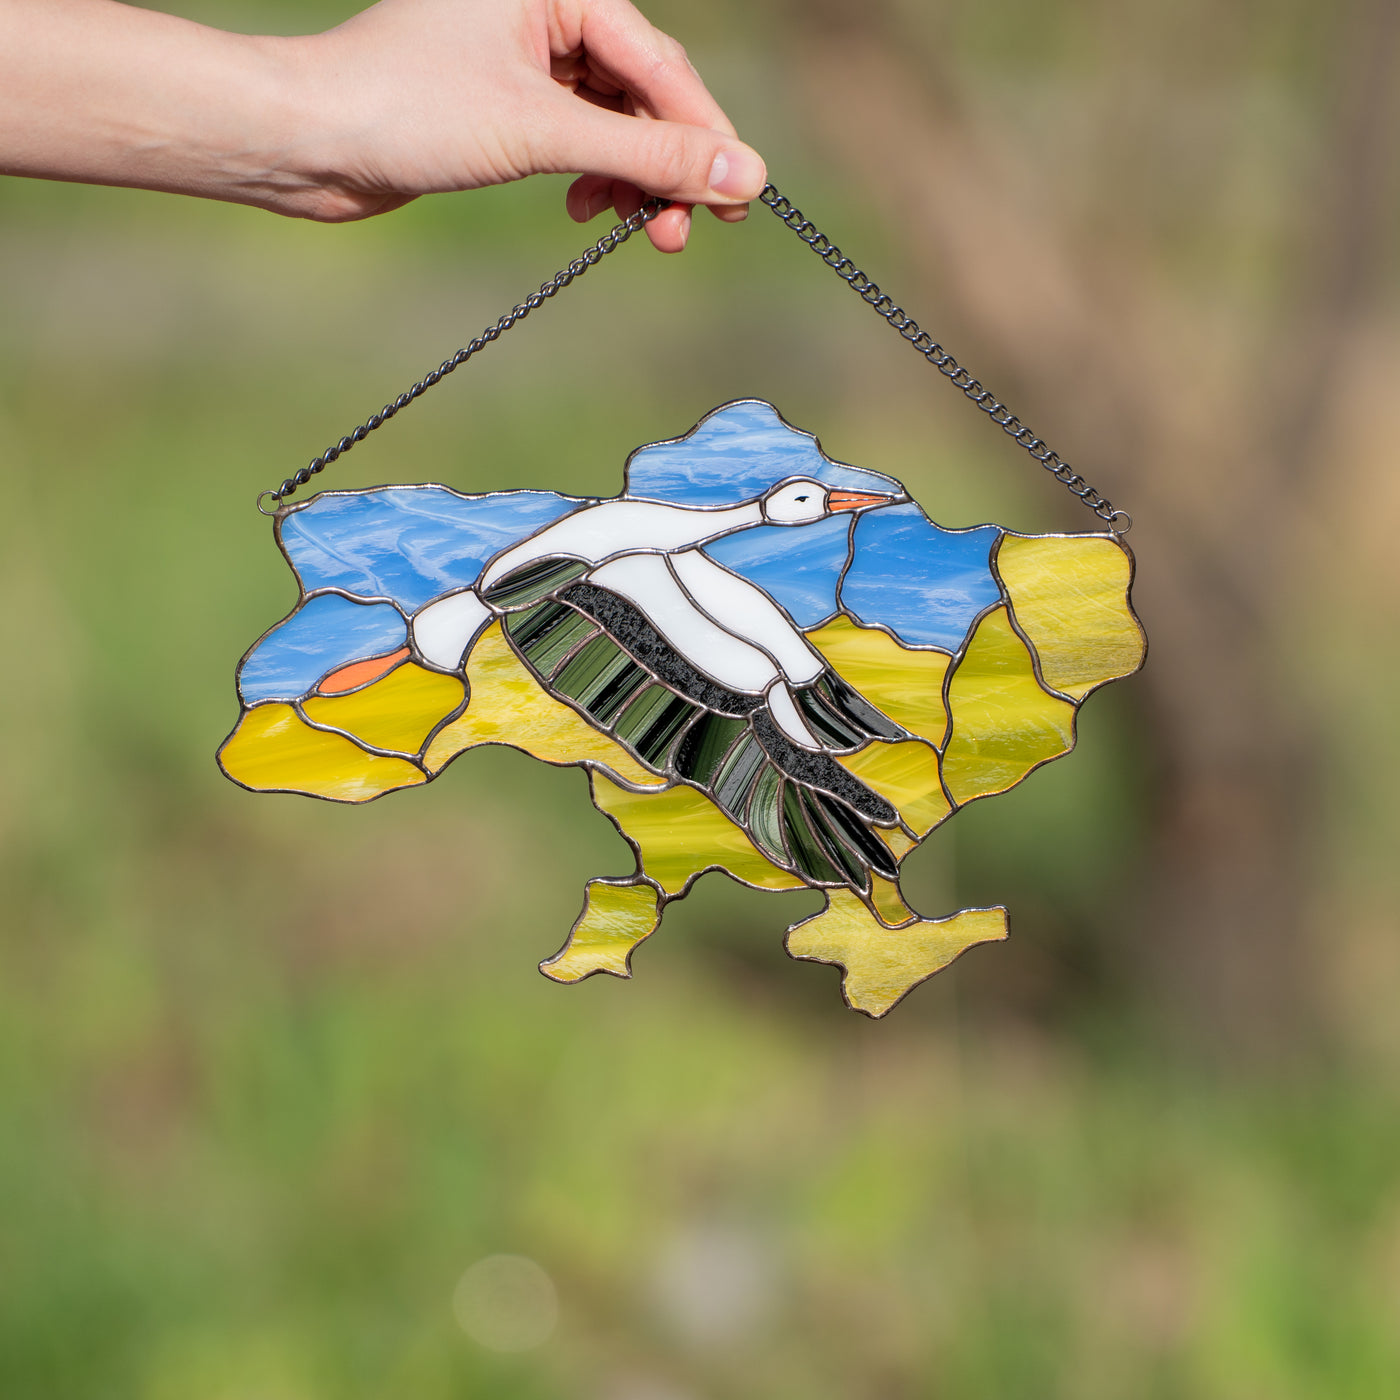 Stained glass window hanging of Ukraine with the flying stork in the middle